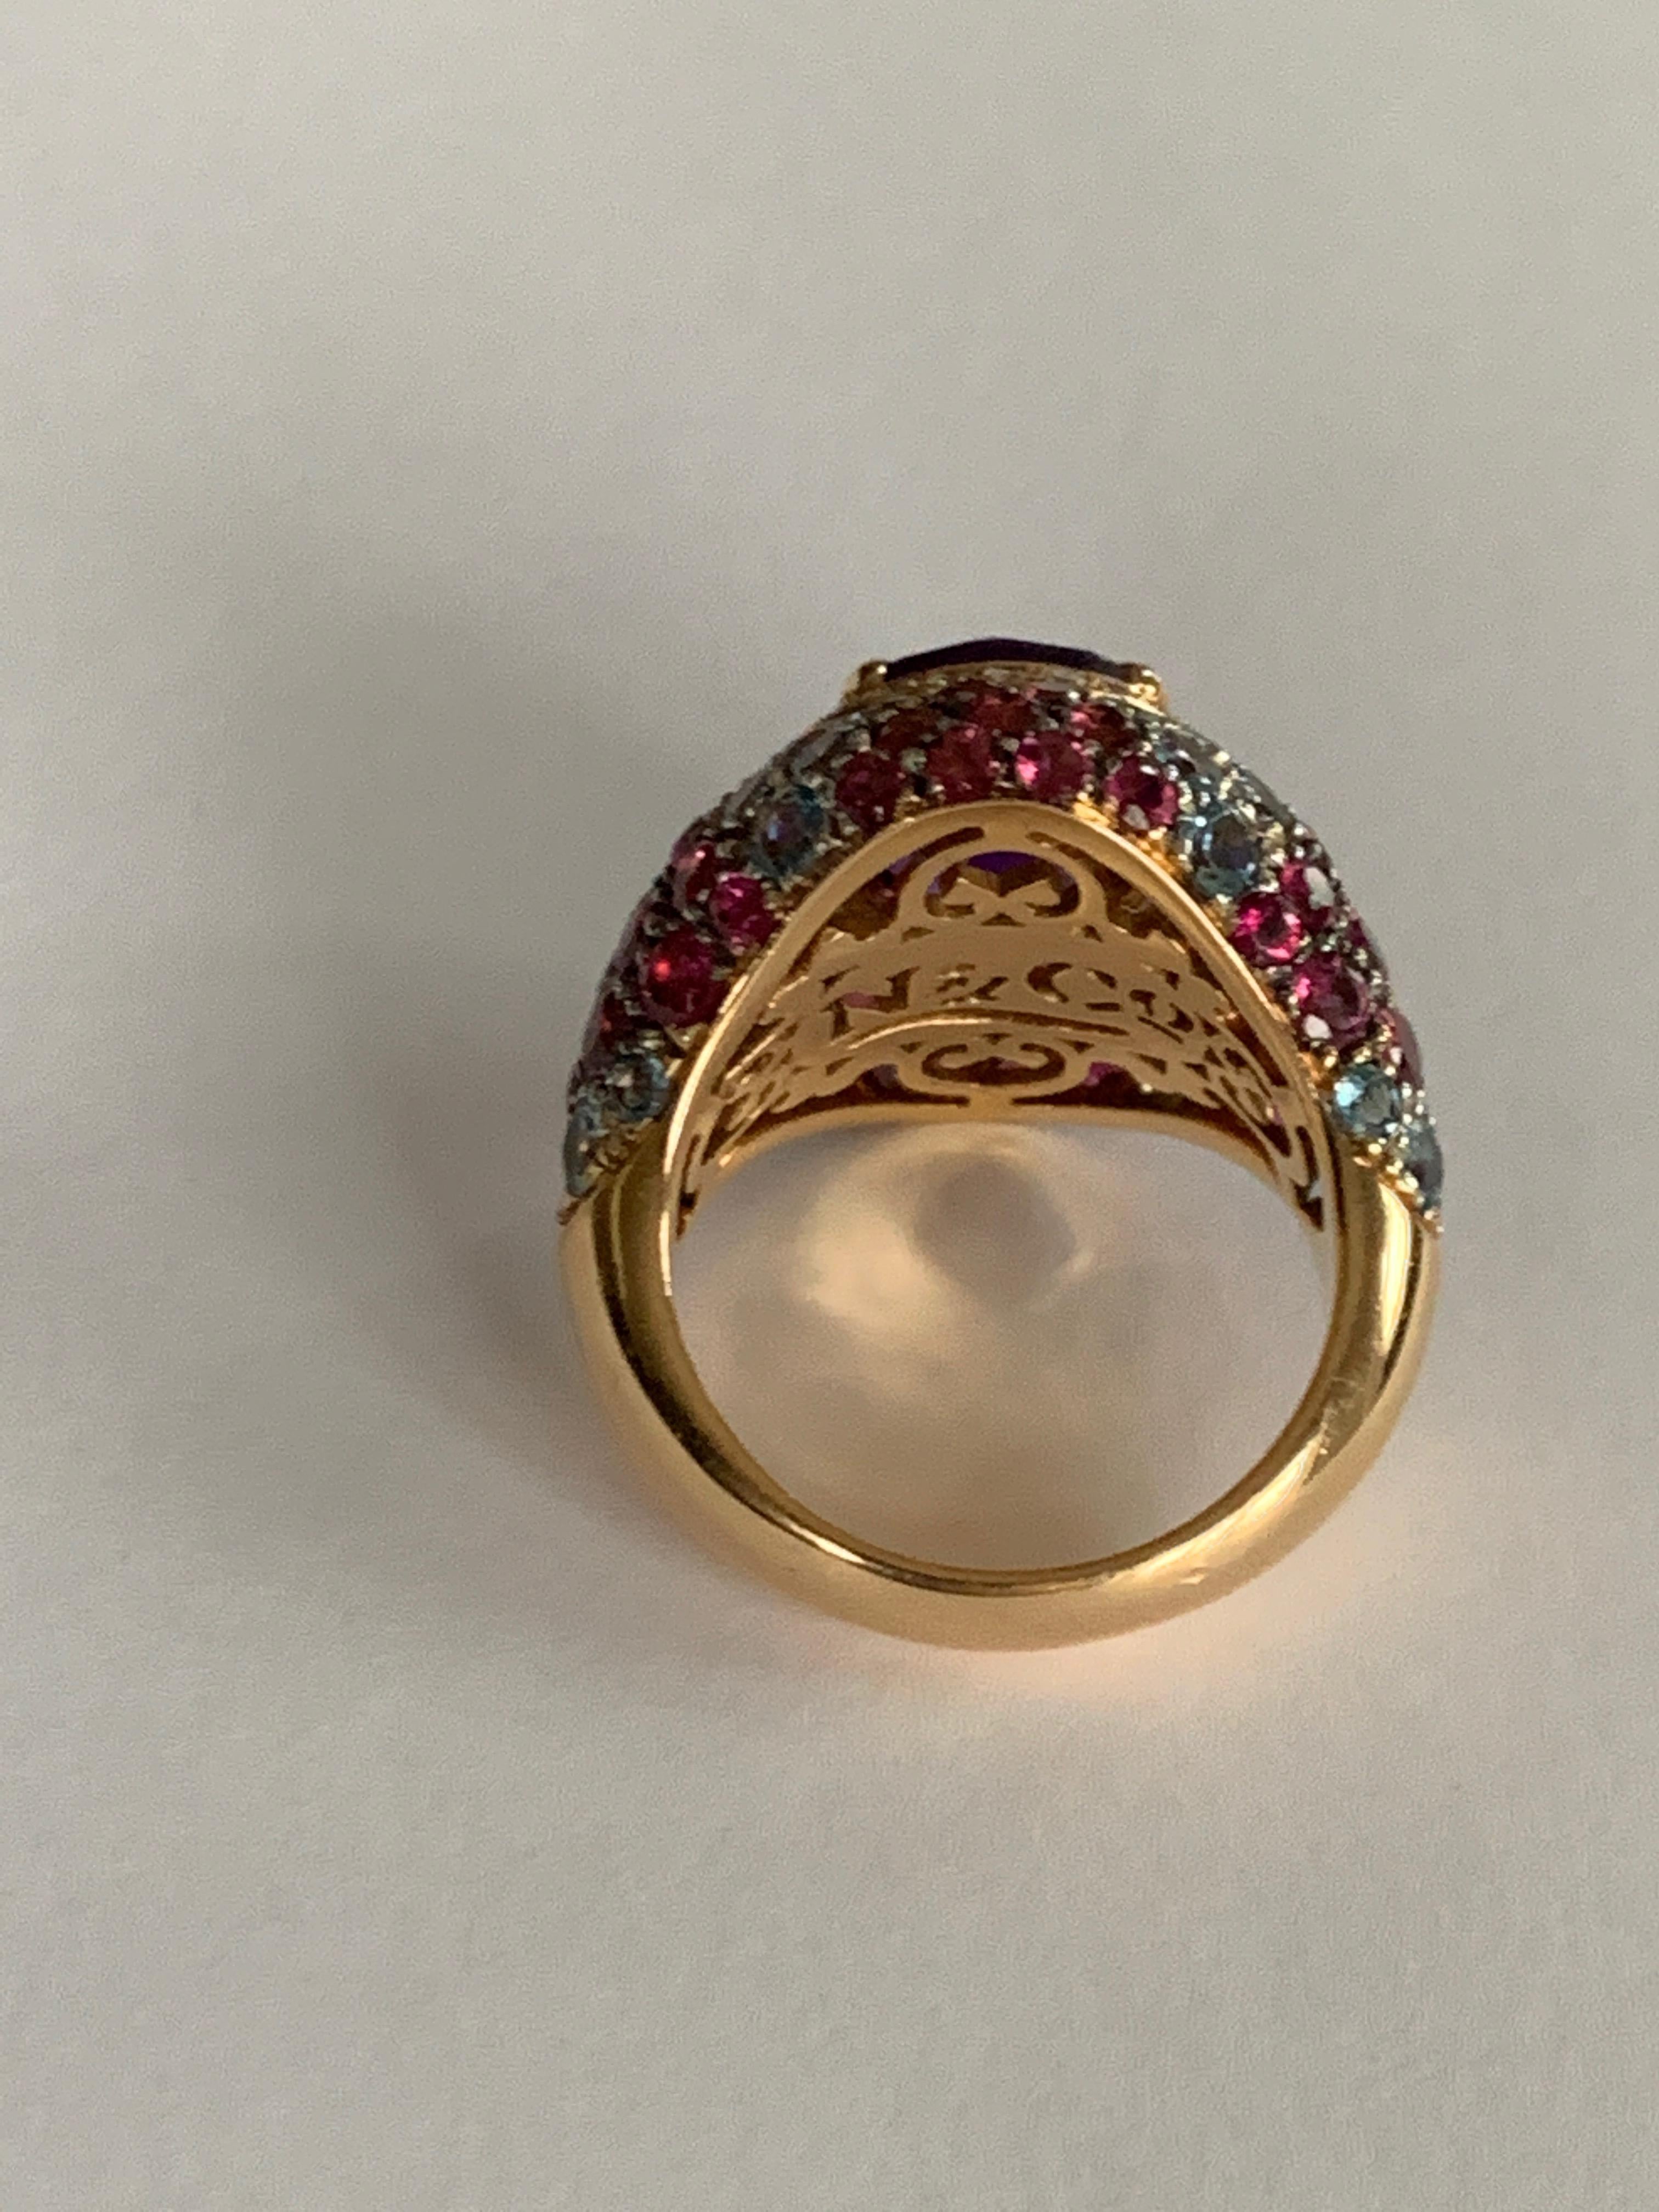 Oval Cut 18 Karat Rose Gold Amethyst Cocktail Ring with Rubellite, Aquamarine and Diamond